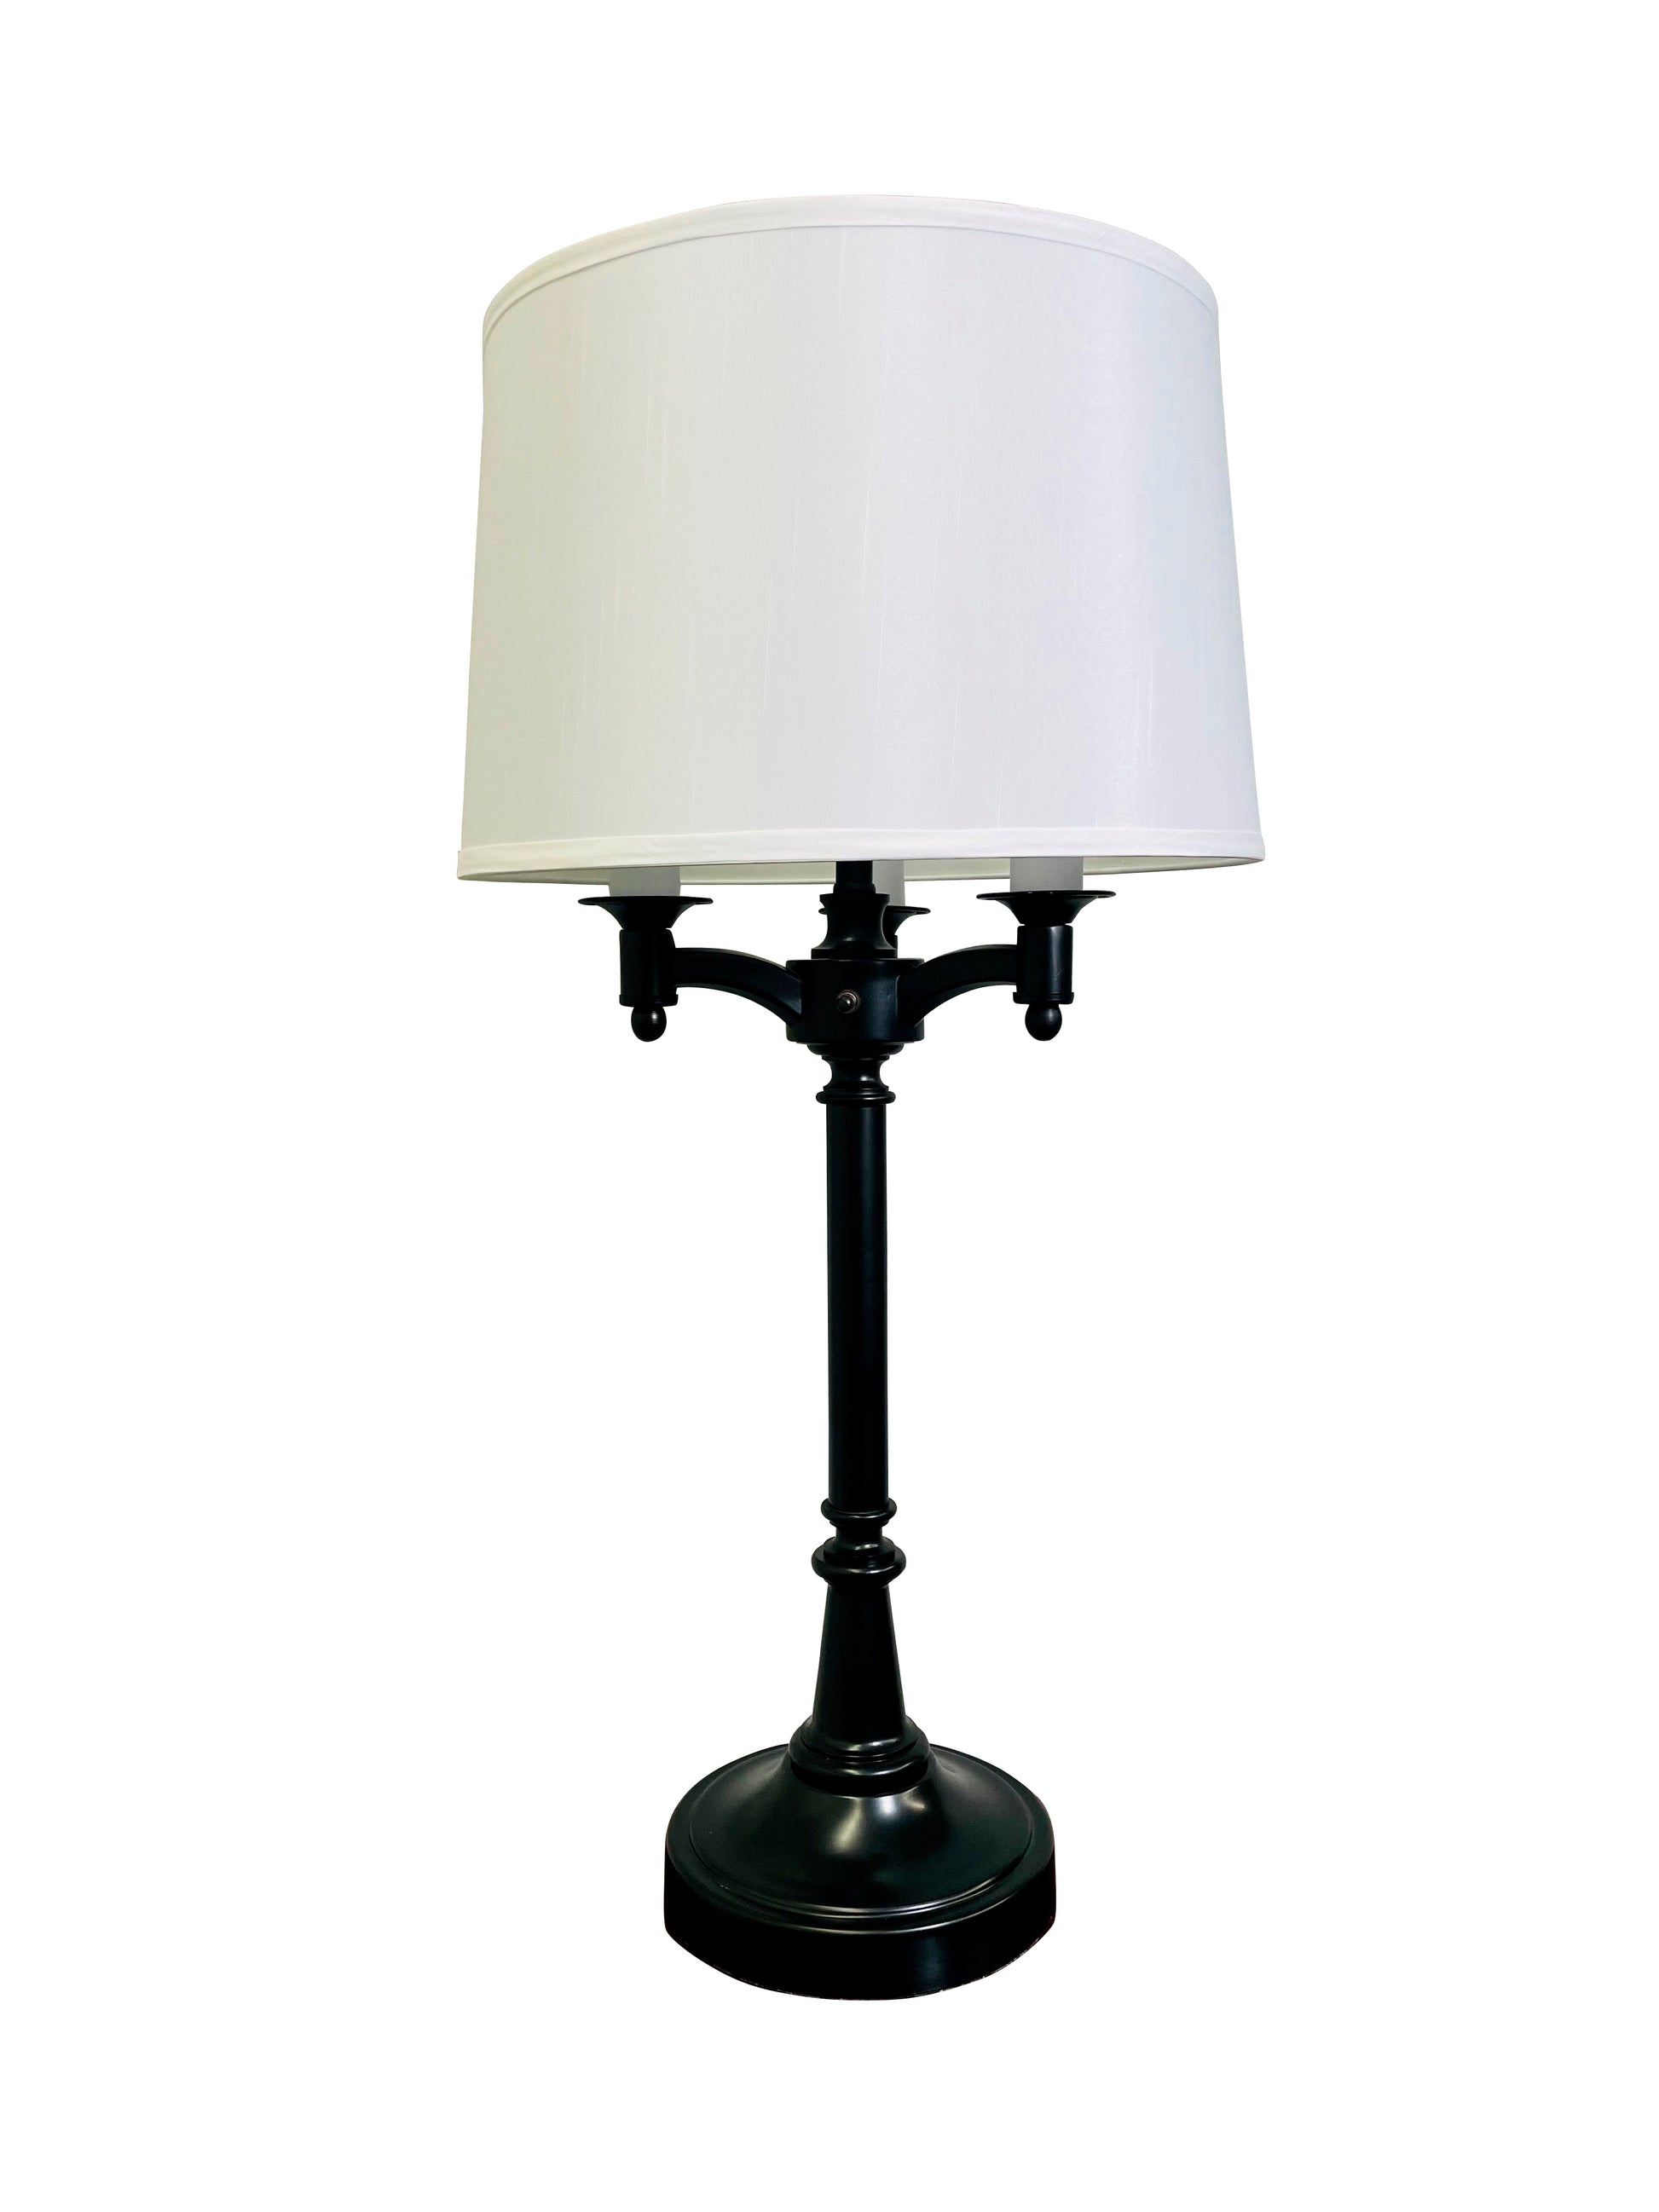 House of Troy Lancaster 31.75" Antique Brass 6-Way Table Lamp L850-BLK